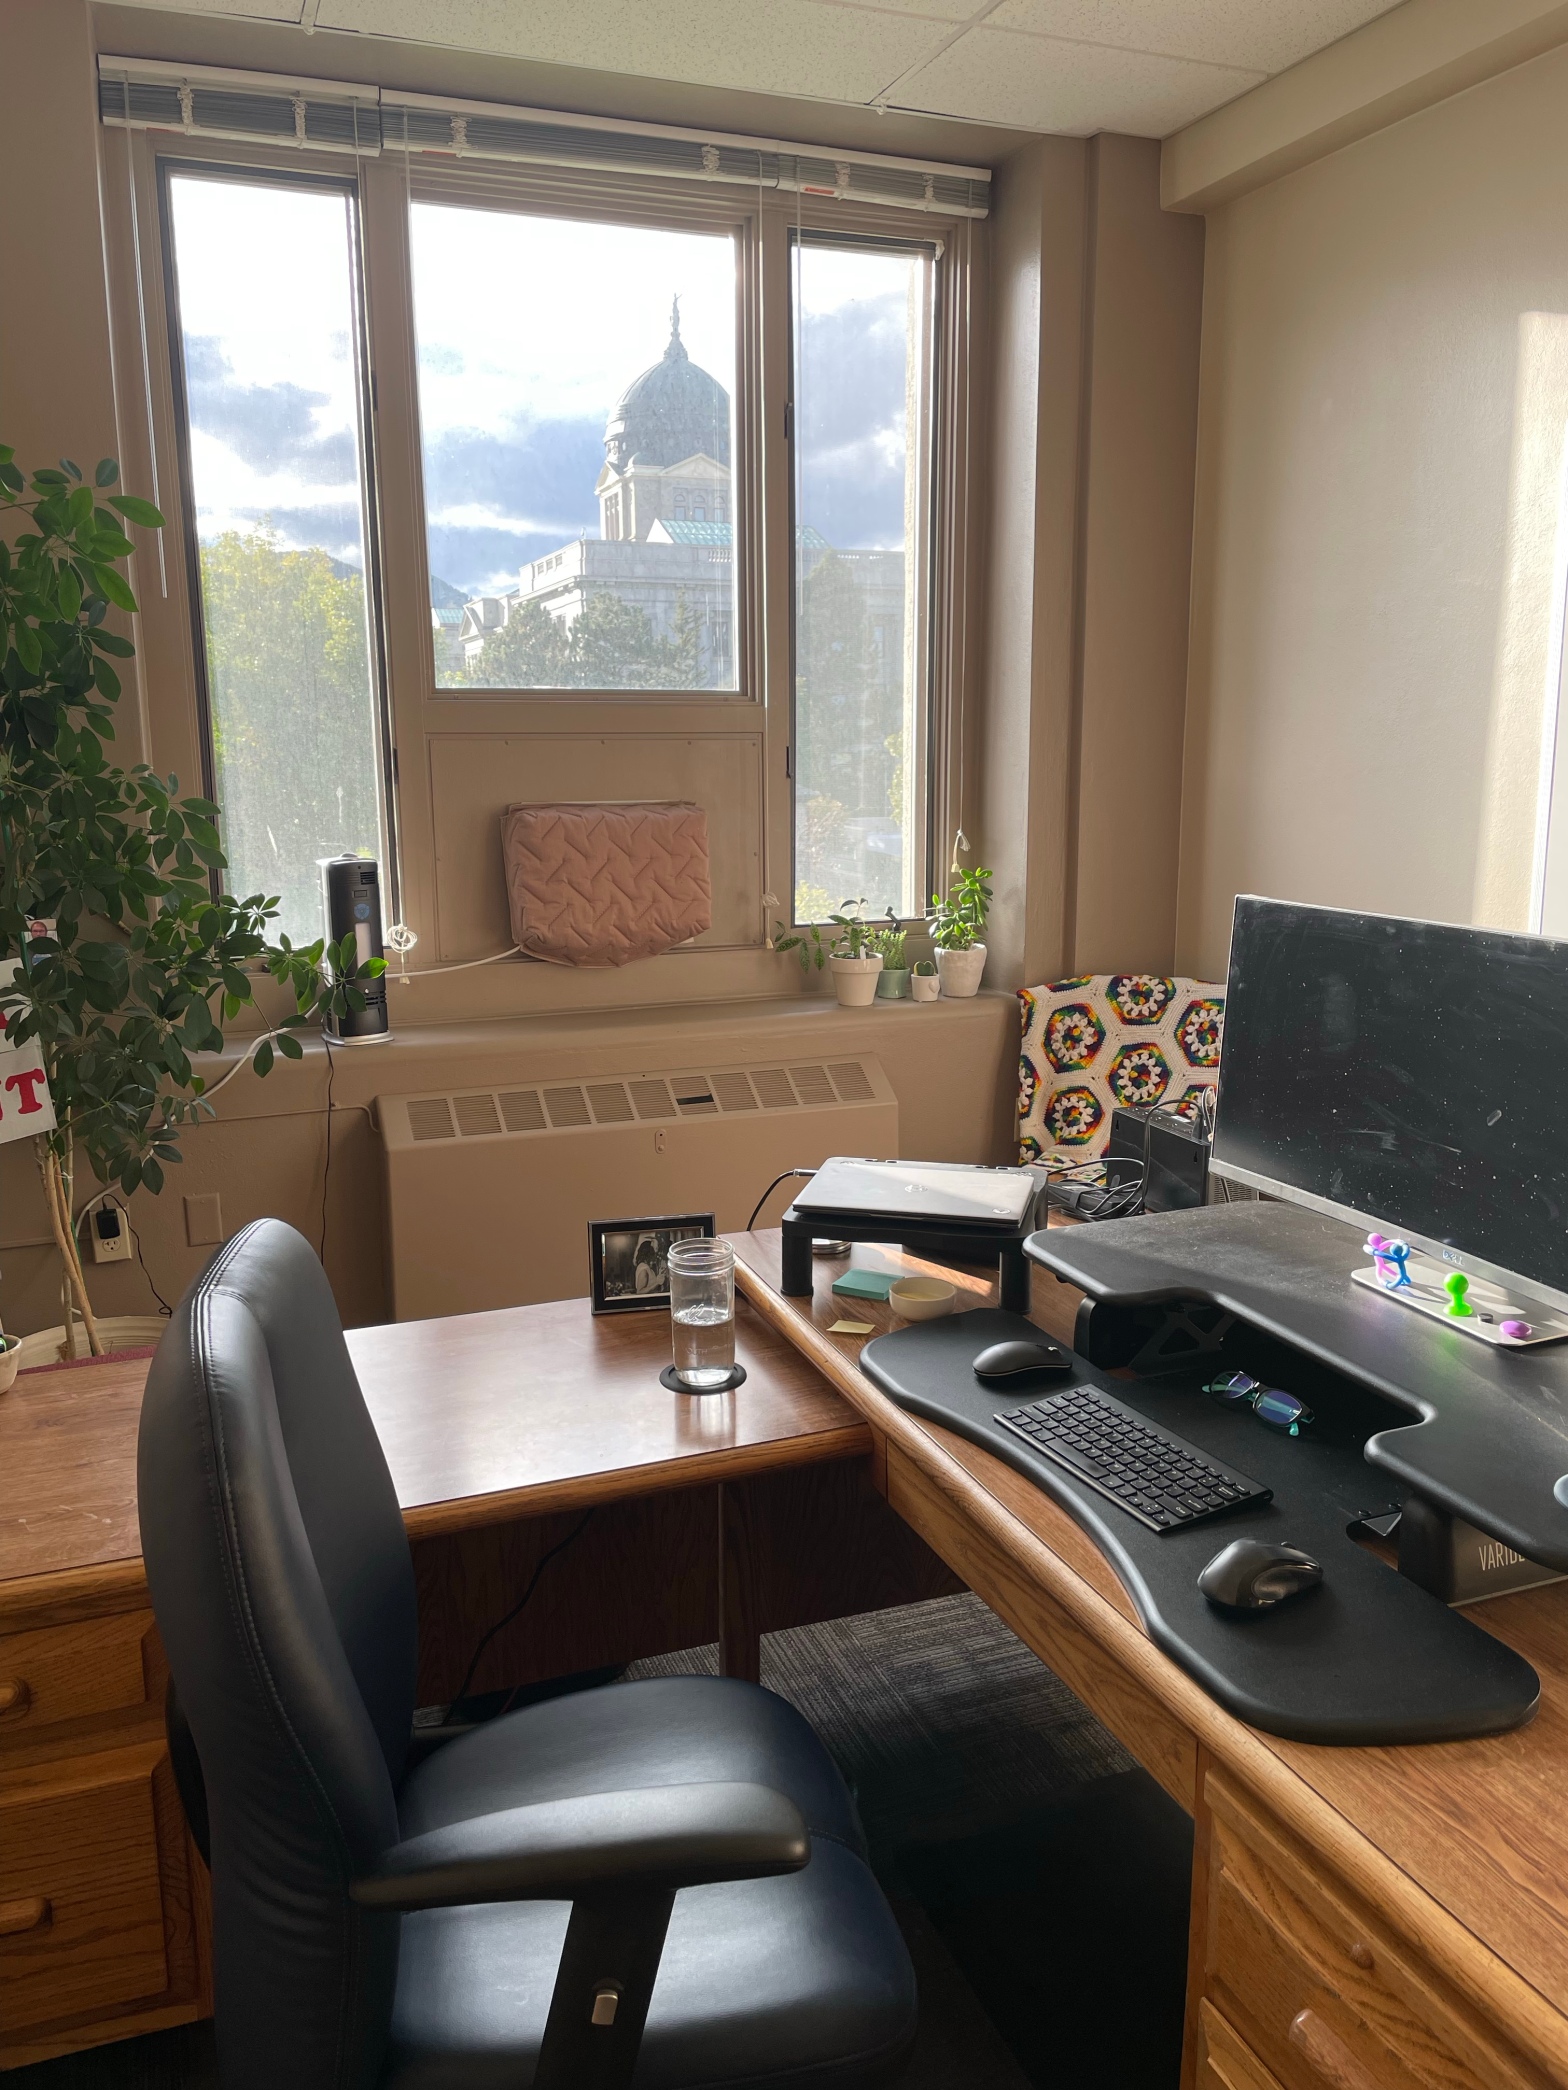 wooden desk with a large monitor in the foreground with a view out the window of a government building in the background